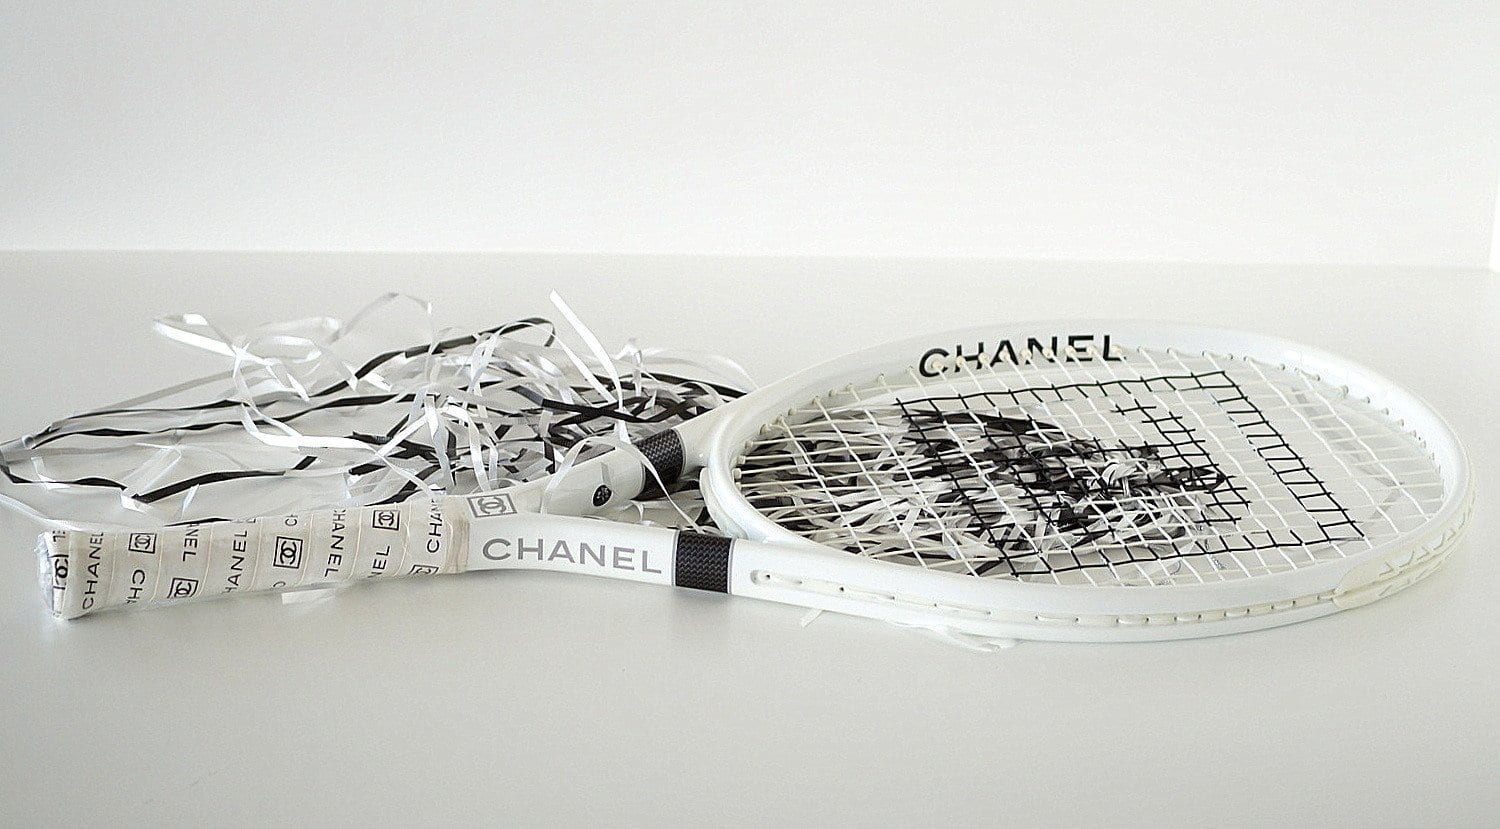 Chanel Limited Edition Tennis Racquet Racket 4 Tennis Balls and